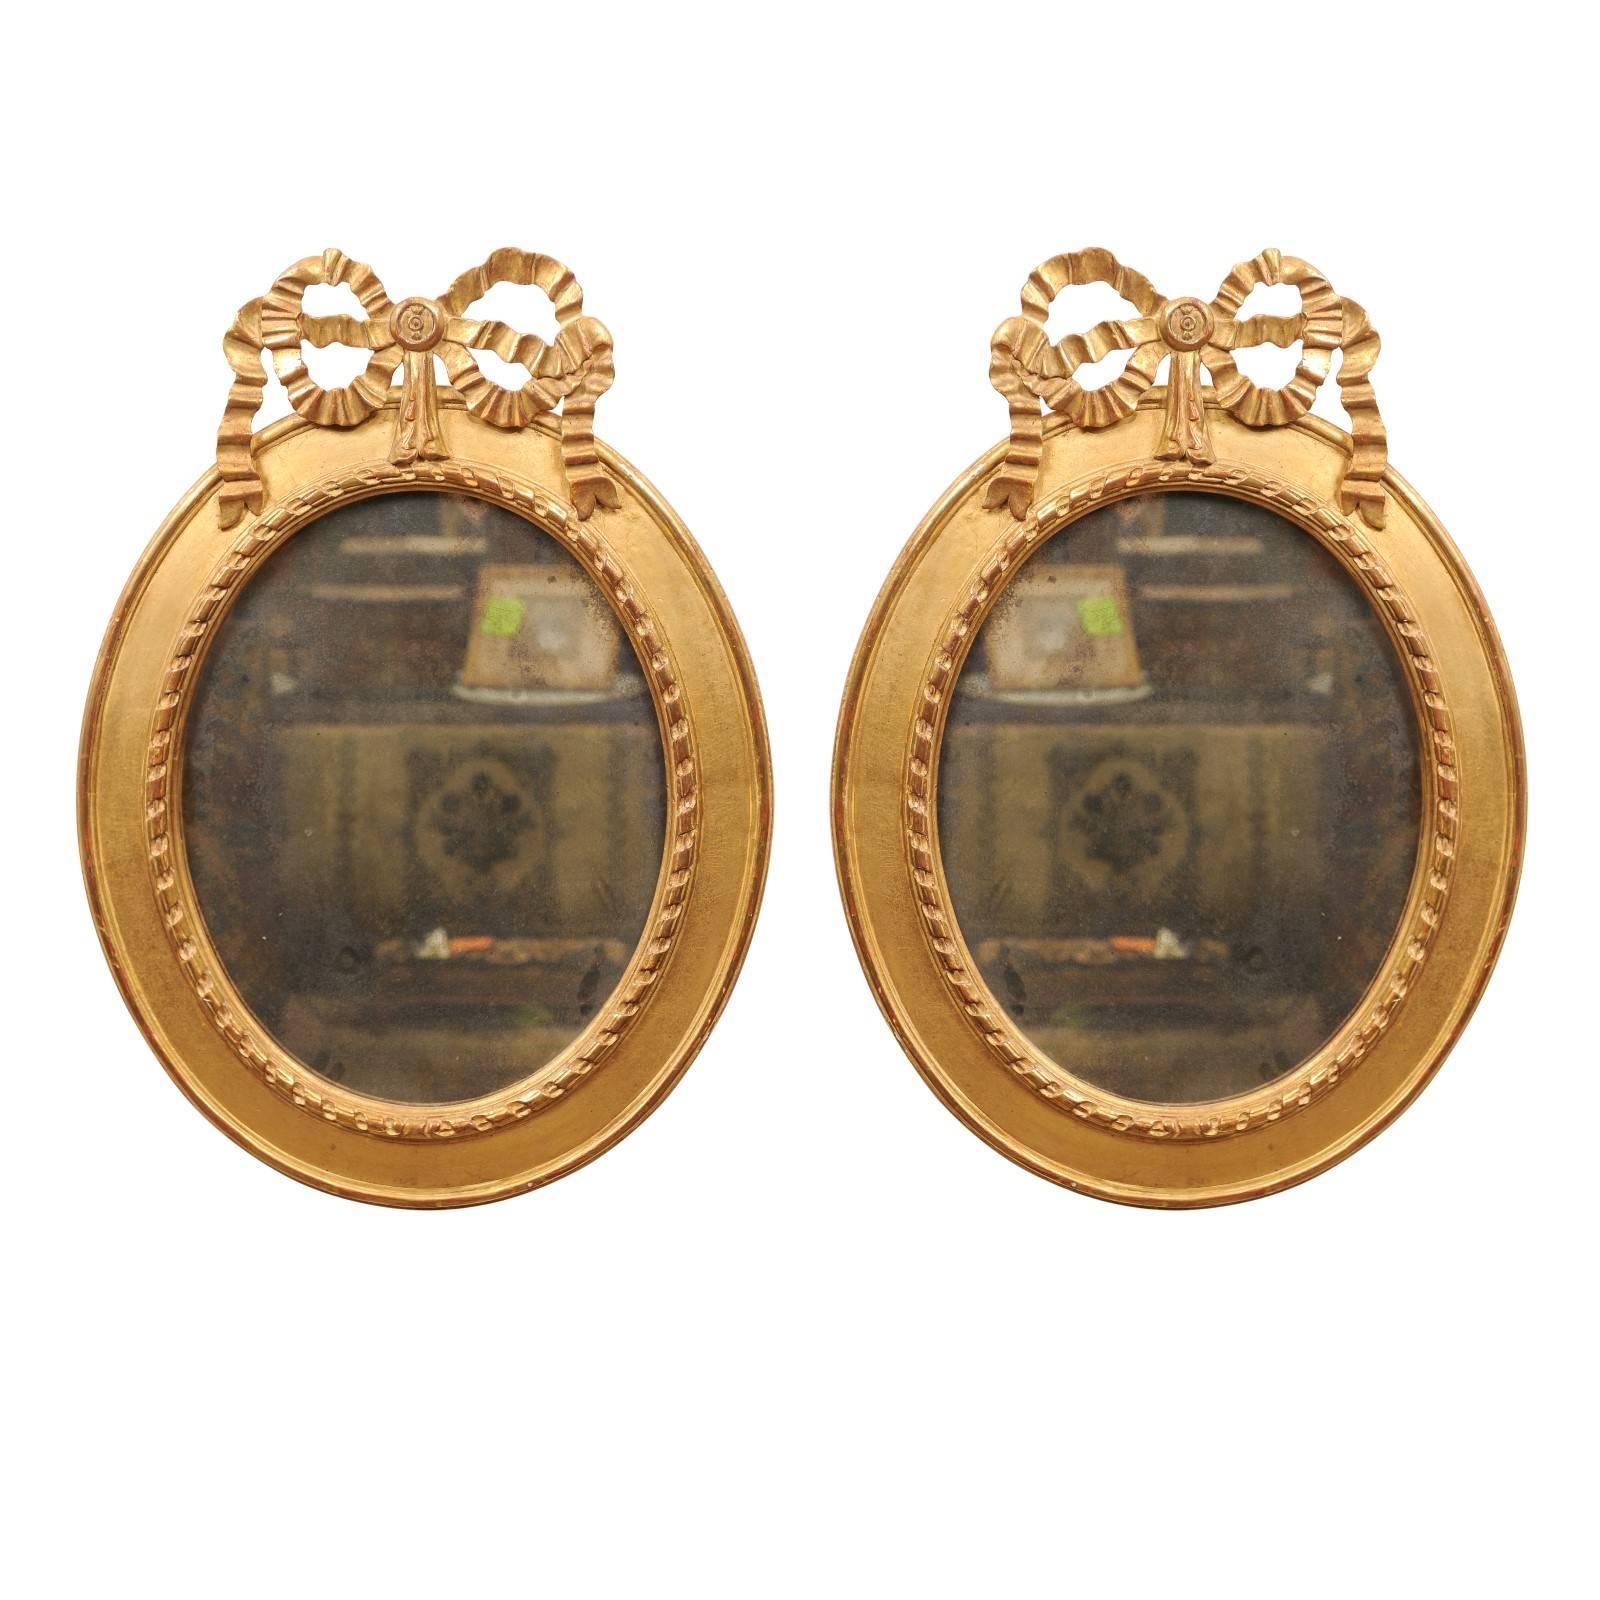 Pair of Giltwood Oval Bow-Topped Mirrors, 20th Century